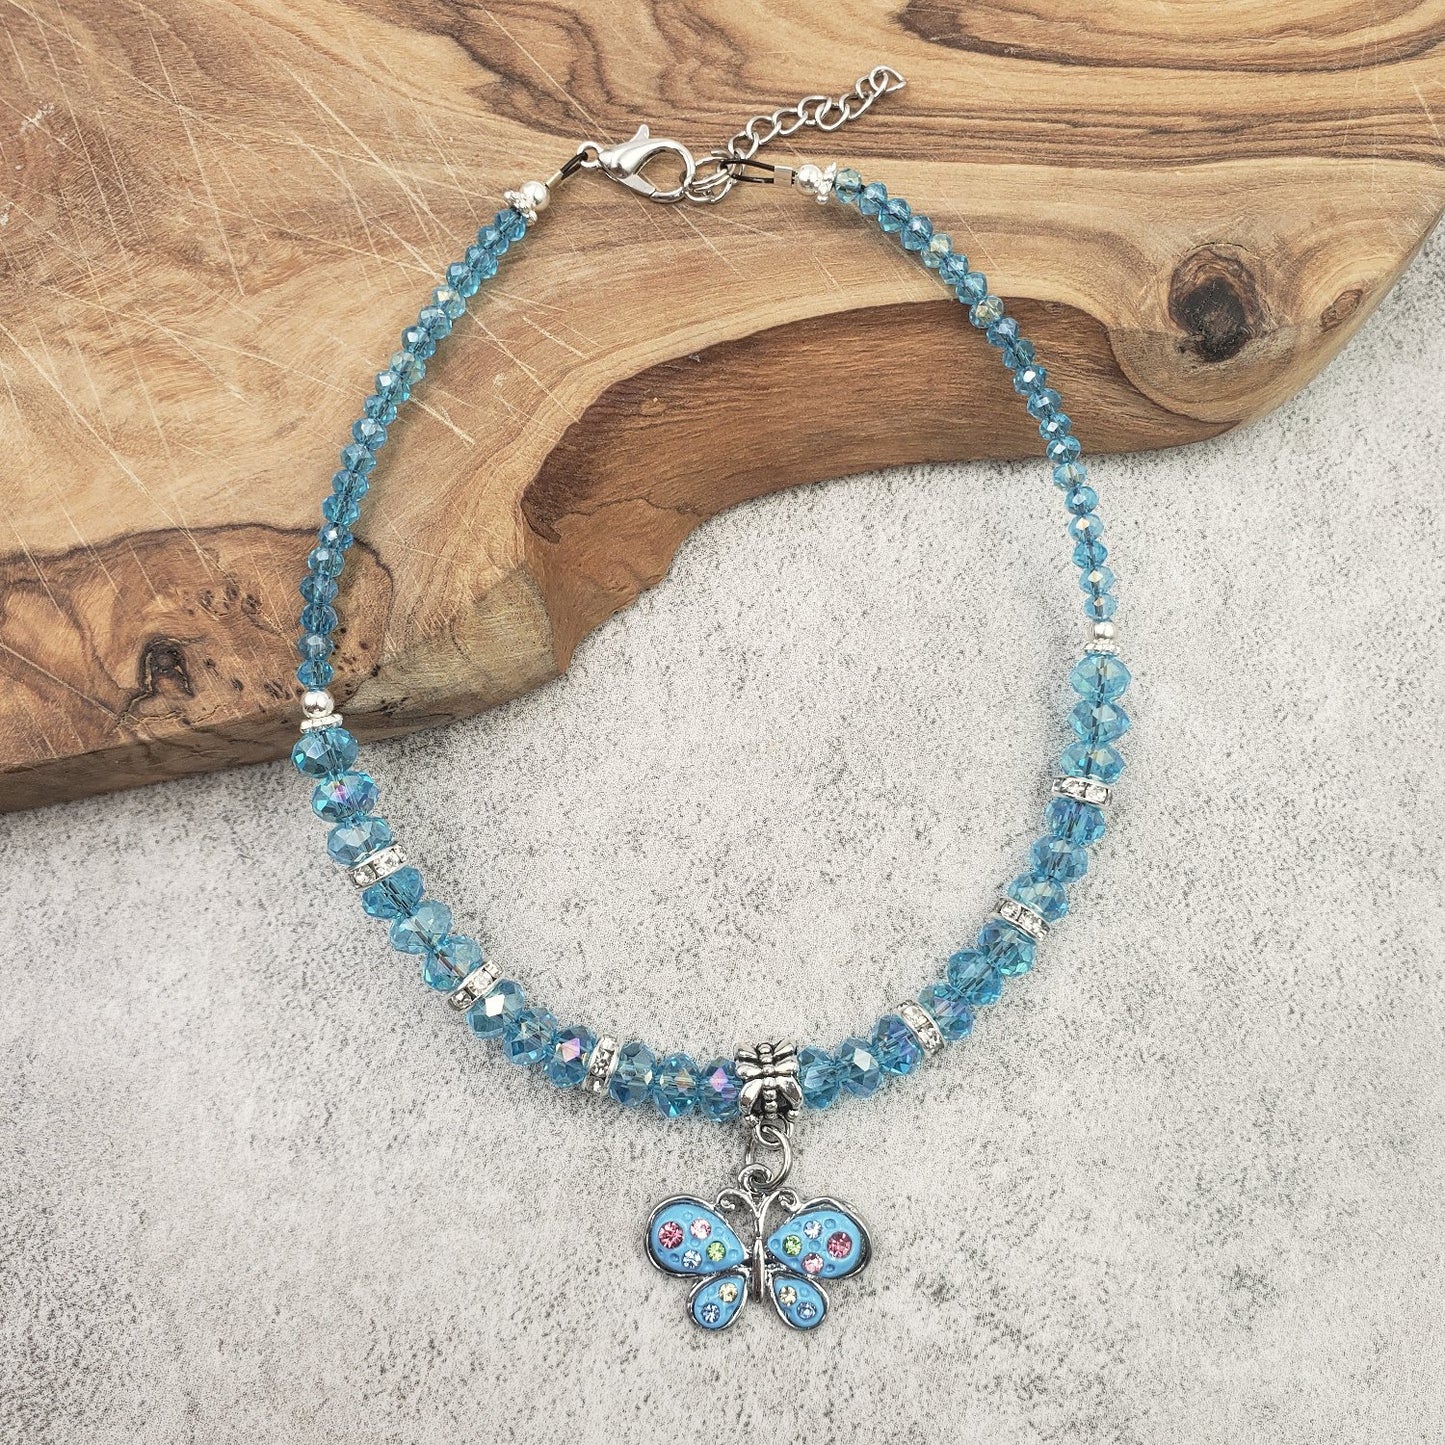 BESHEEK Butterfly BLUE RAINBOW Faceted Crystal Rhinestone Glass Artisan Beaded Anklet with Extension | Handmade Hypoallergenic Beach Gala Wedding Style Jewelry